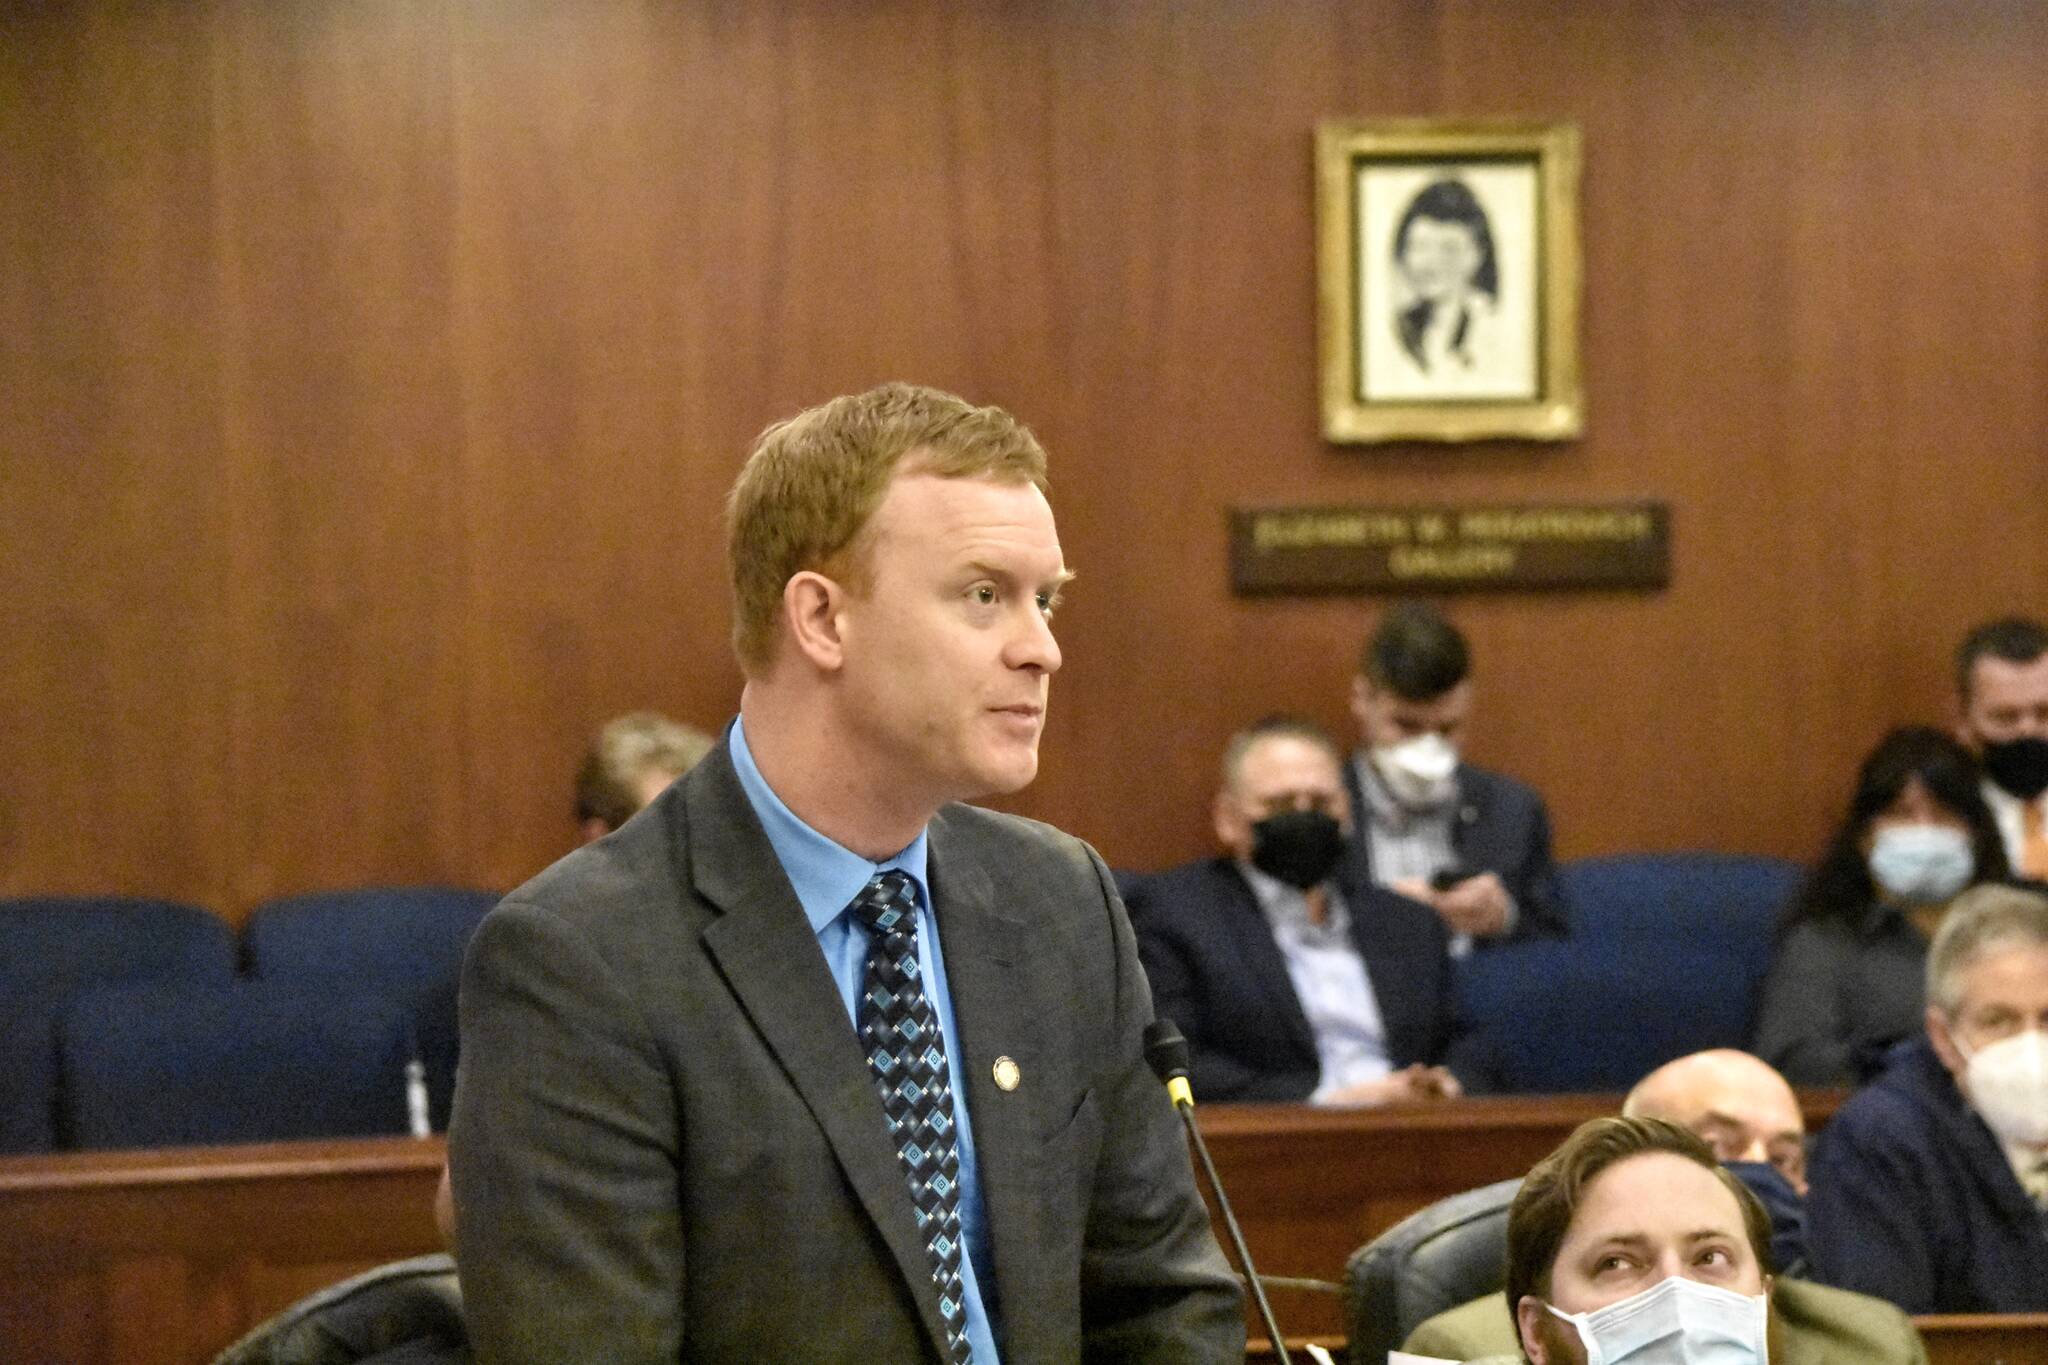 Rep. David Eastman, R-Wasilla, speaks on the floor of the House of Representatives on Friday, Feb. 3, 2022. Eastman has come under scrutiny for his membership in the Oath Keepers, a right-wing paramilitary group whose leaders have been charged with sedition for their role in the Jan. 6, riot at the U.S. Capitol. A House committee will meet next week to investigate the Oath Keepers. (Peter Segall / Juneau Empire)